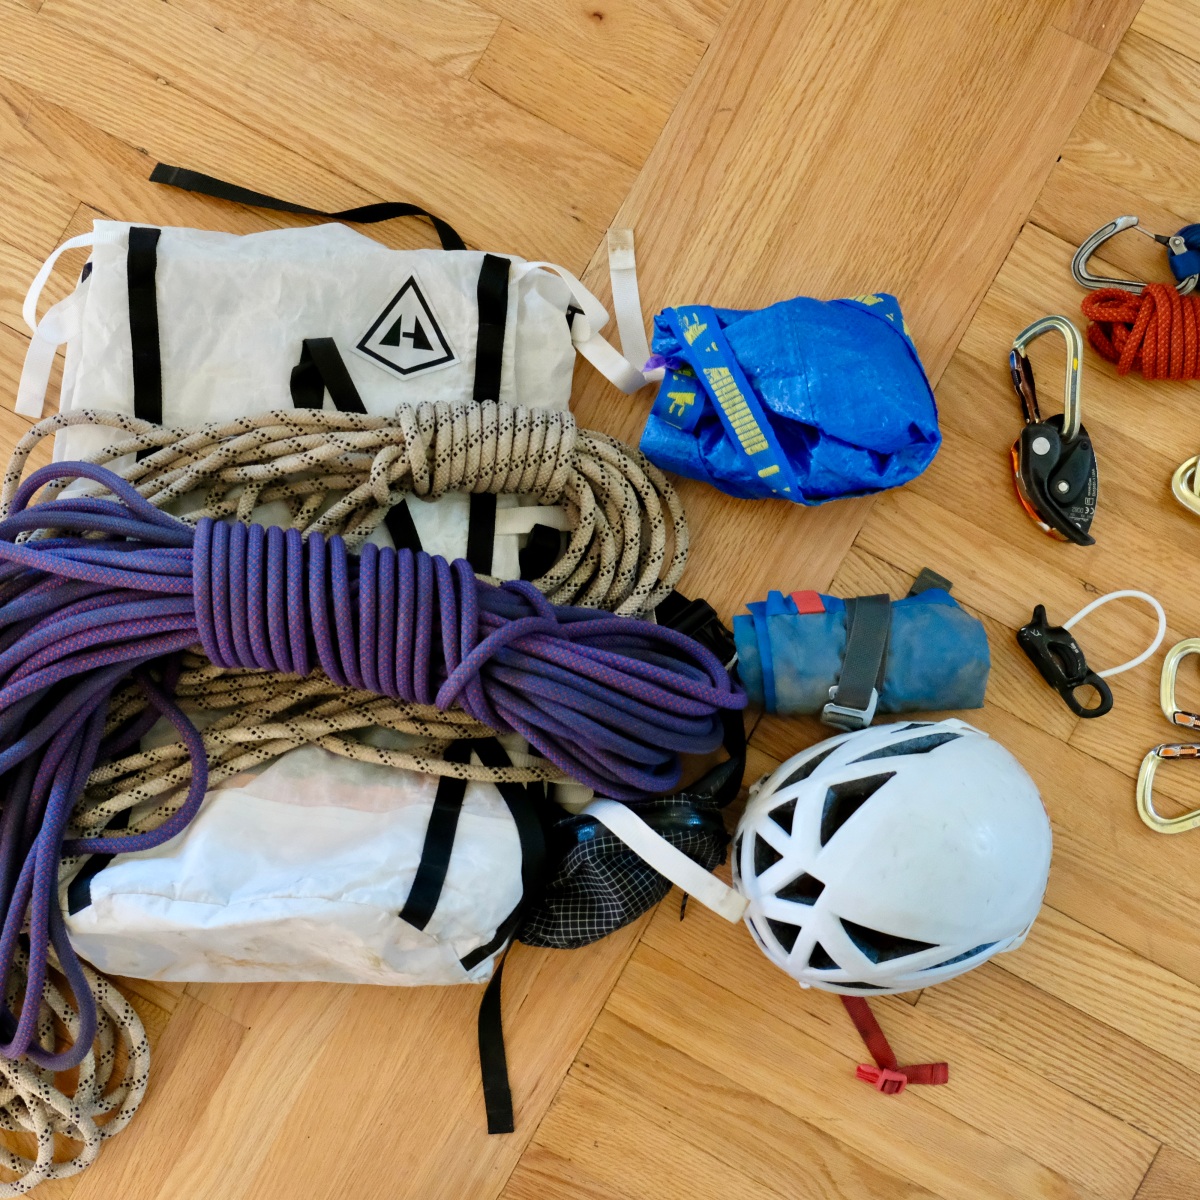 Gear for Outdoor Climbing at Carderock or Great Falls